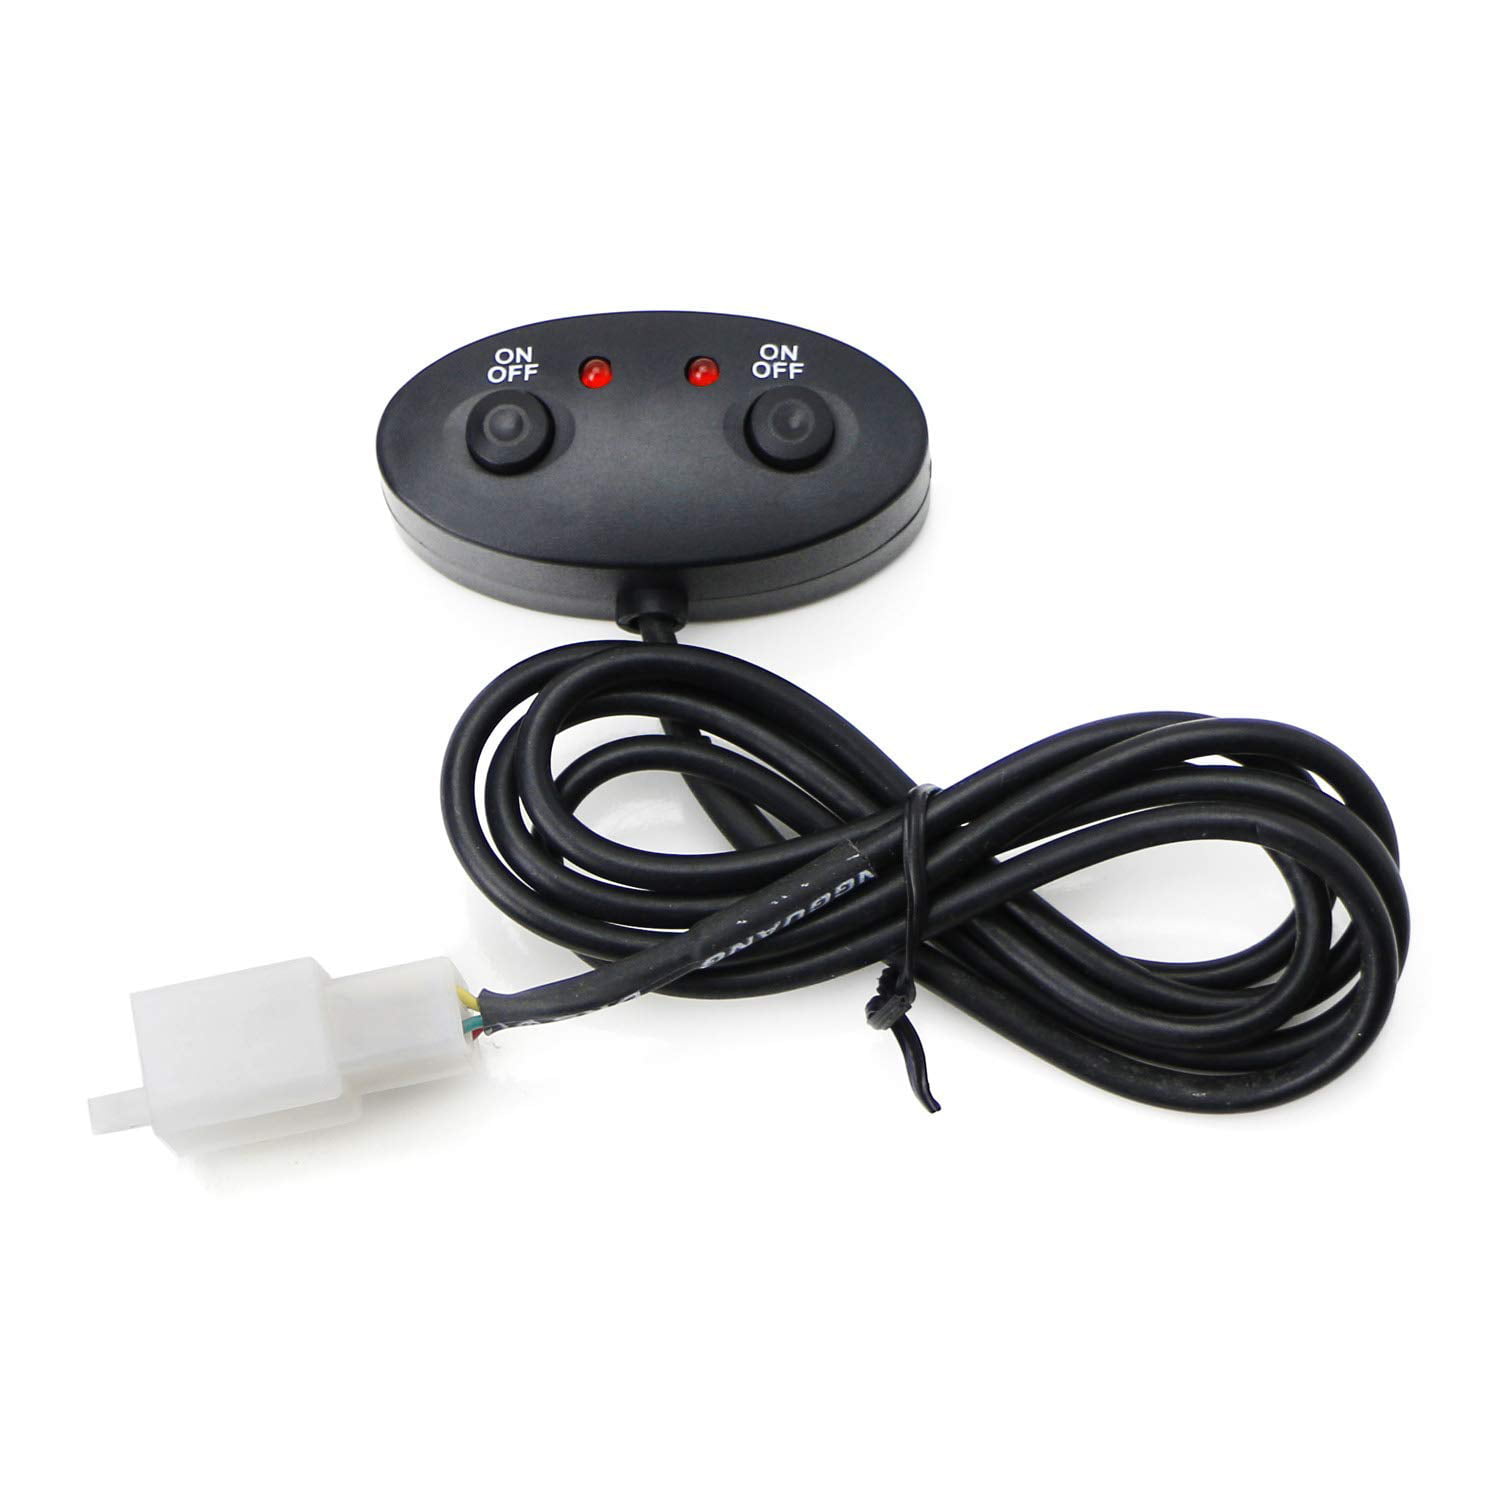 7/8" Motorcycle Fog Light ON OFF Switch Button With Red LED Indicator Light